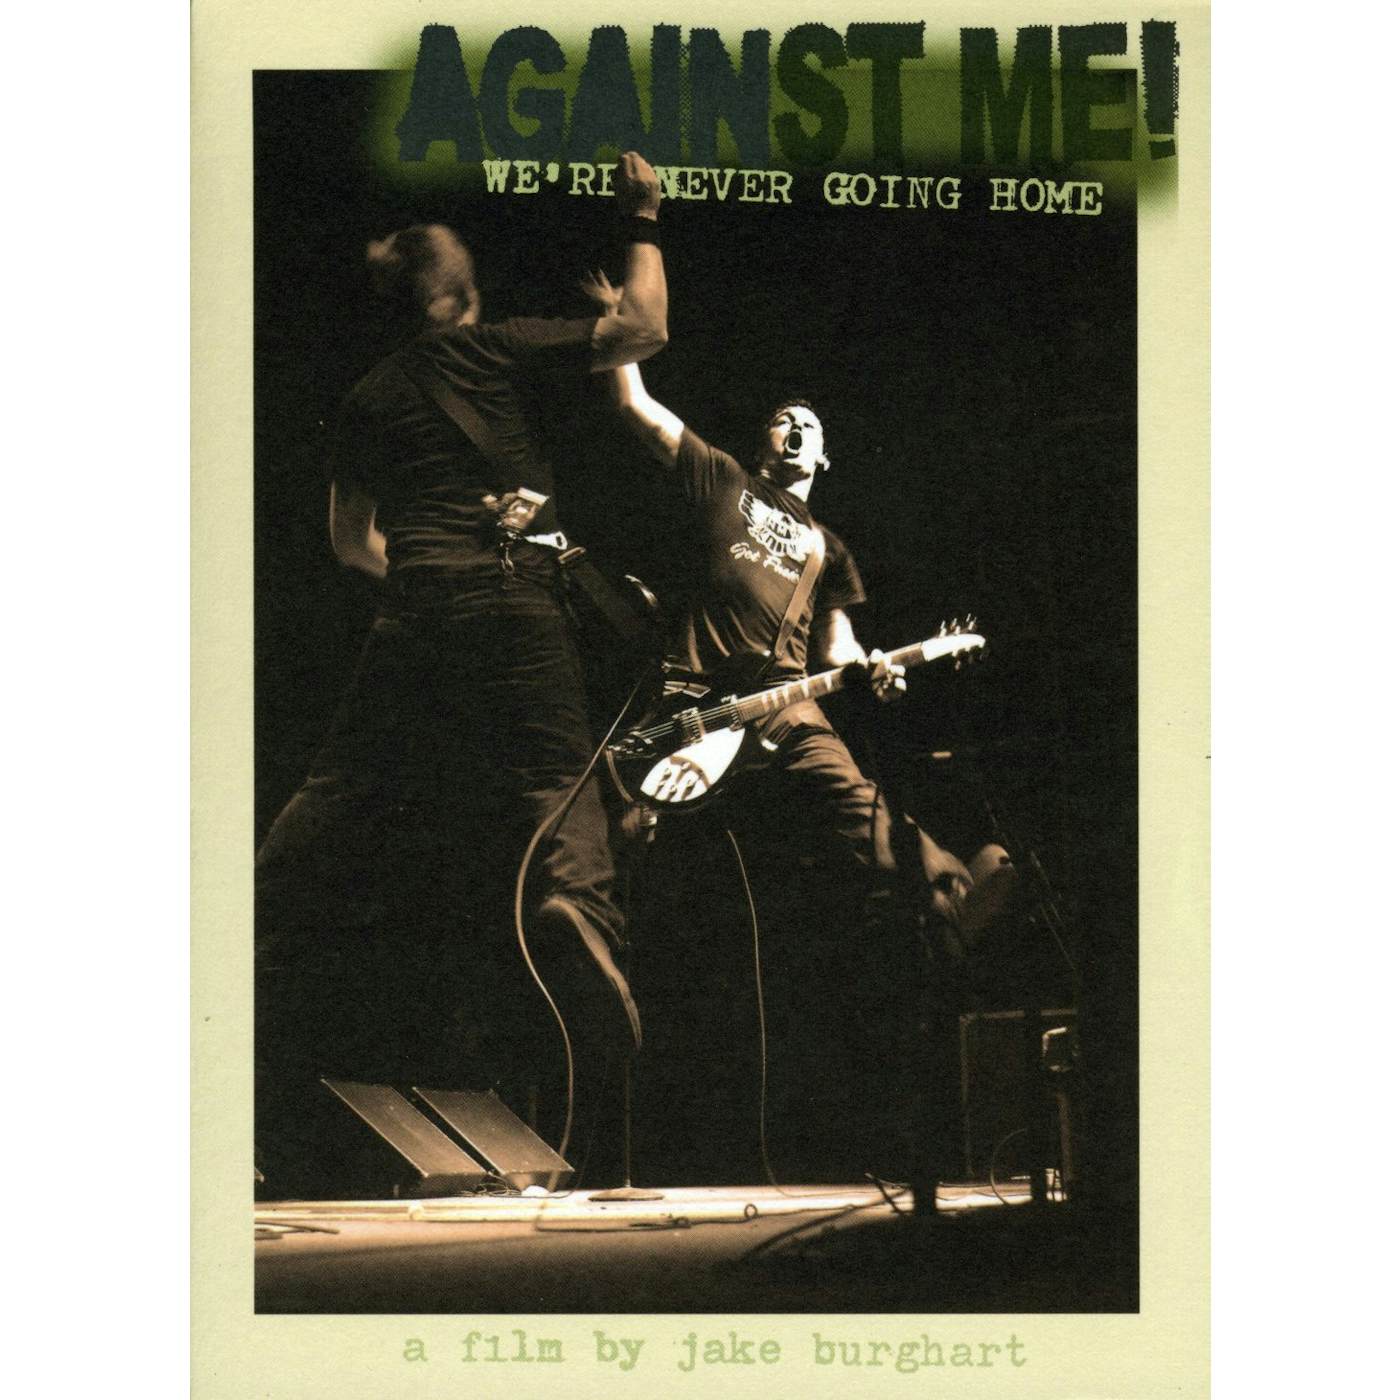 Against Me! WE'RE NEVER GOING HOME DVD